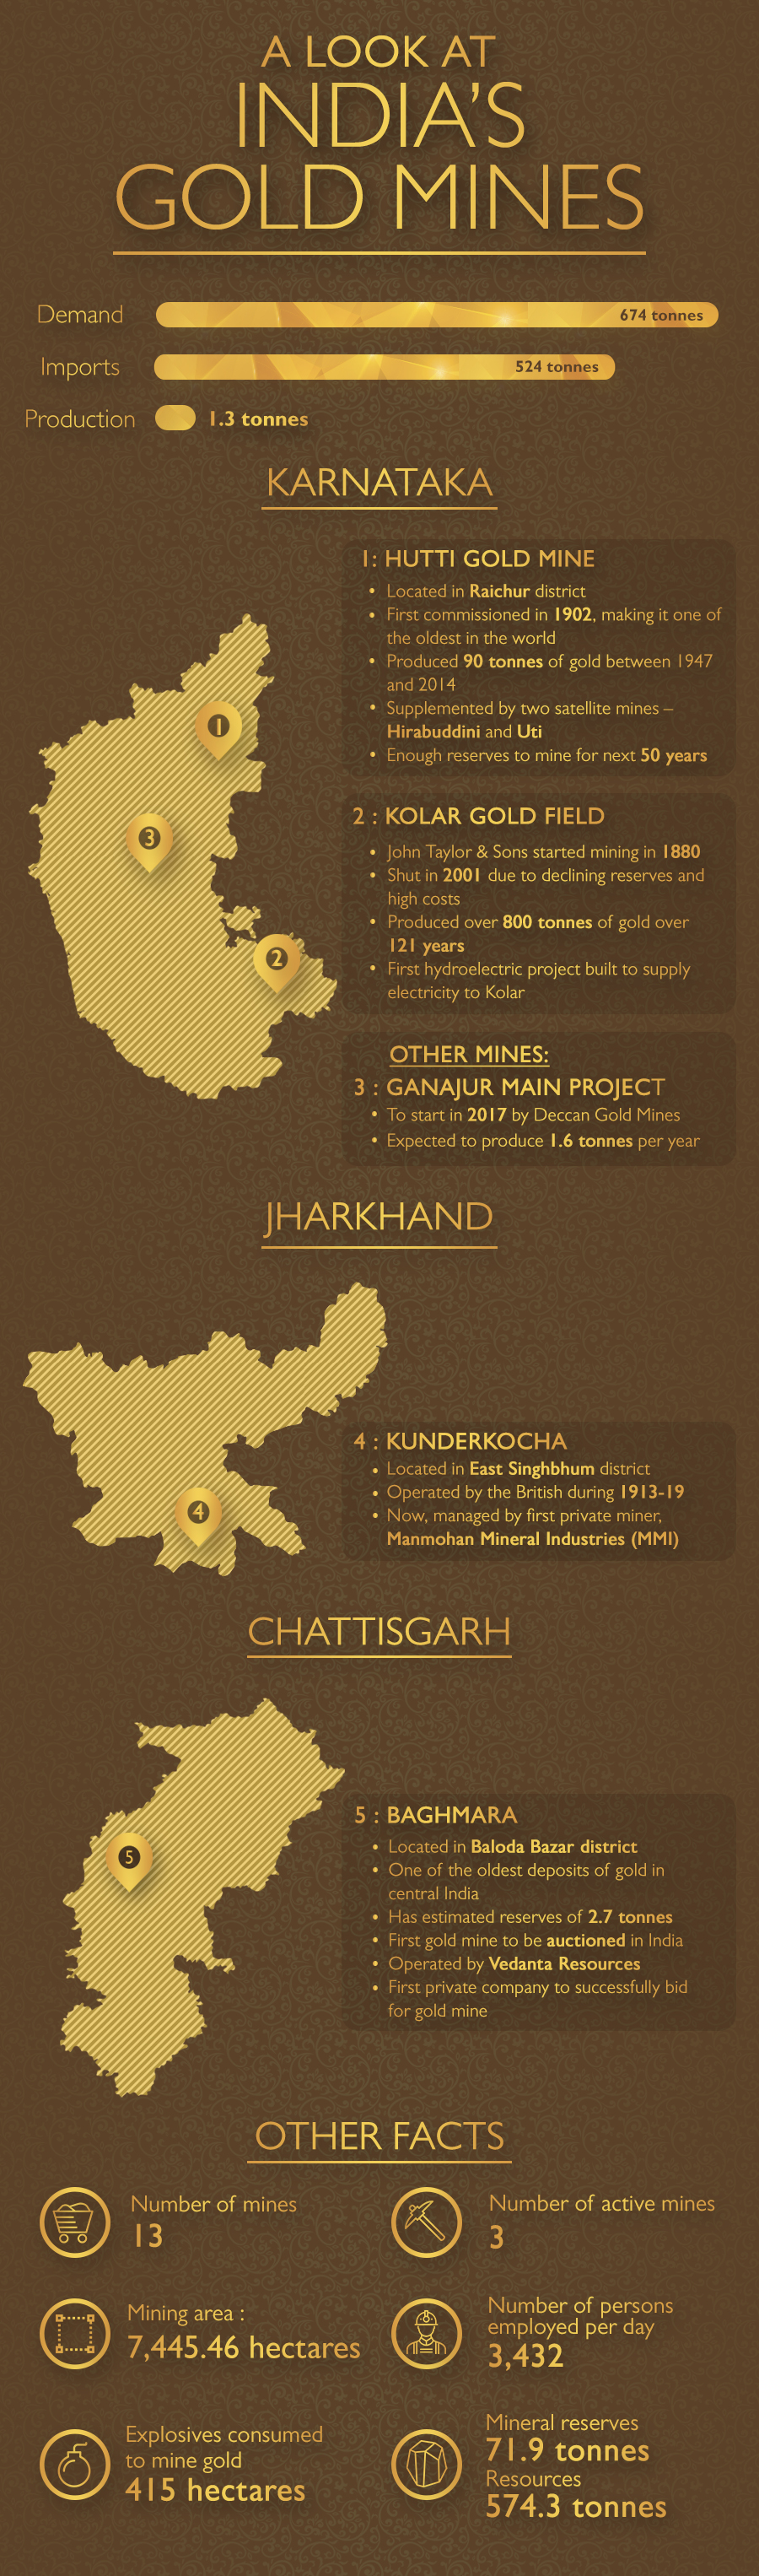 Did you know India has 13 gold mines are located in various states? Let's take a look at the famous Indian gold mines which over the years have supplied gold to fulfil demand.